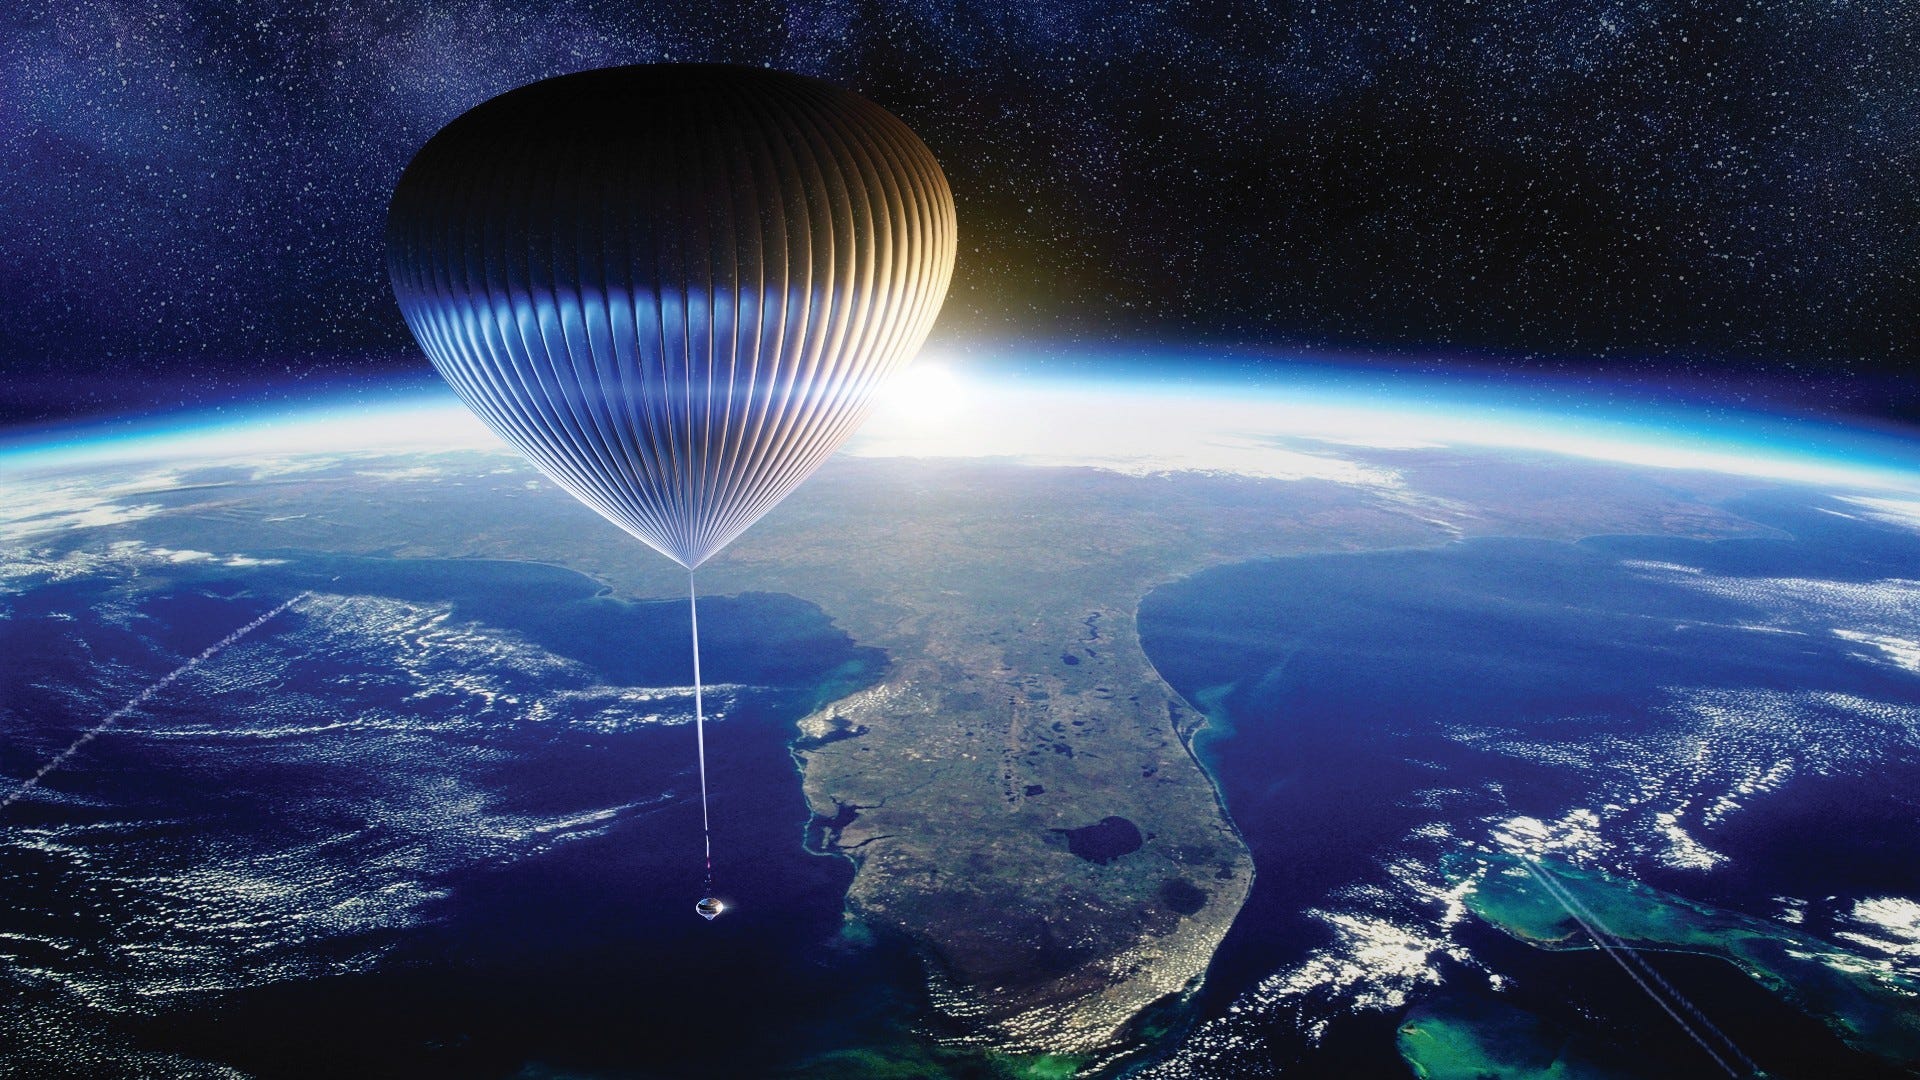 Space tourism is coming faster than we think